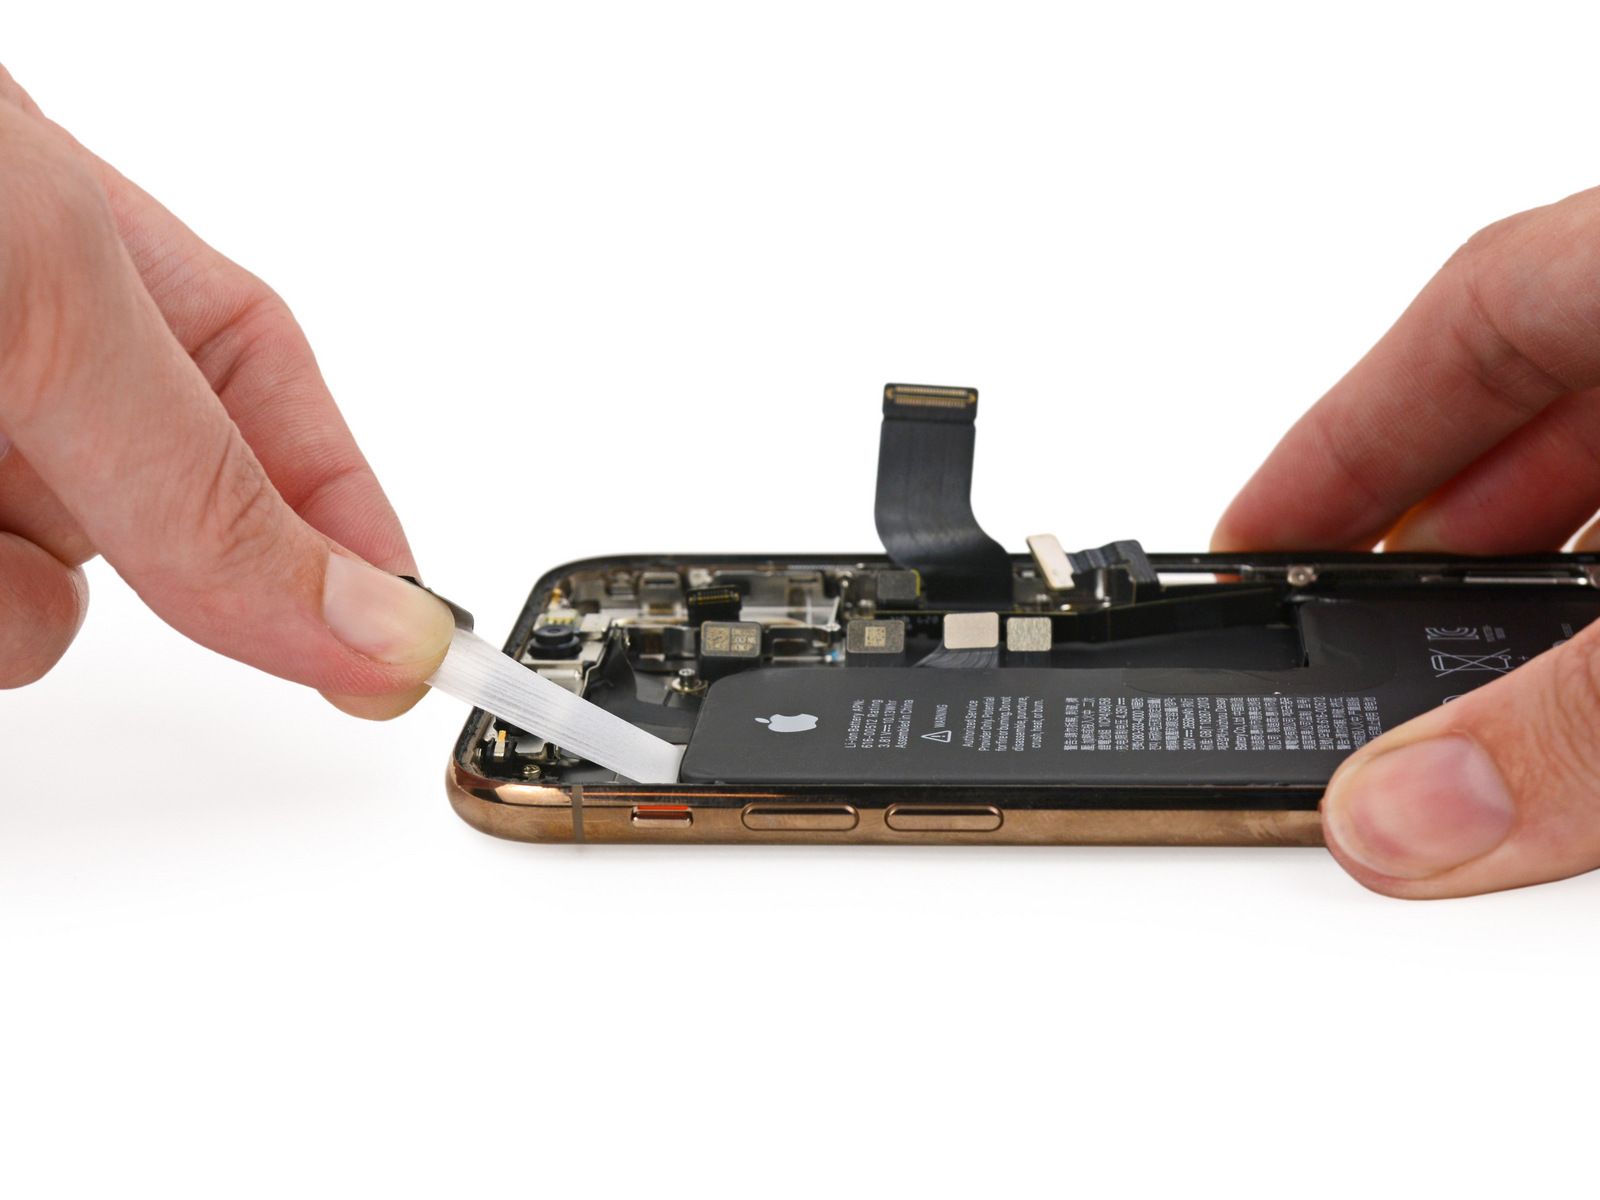 The best phone and tech repair services image 1